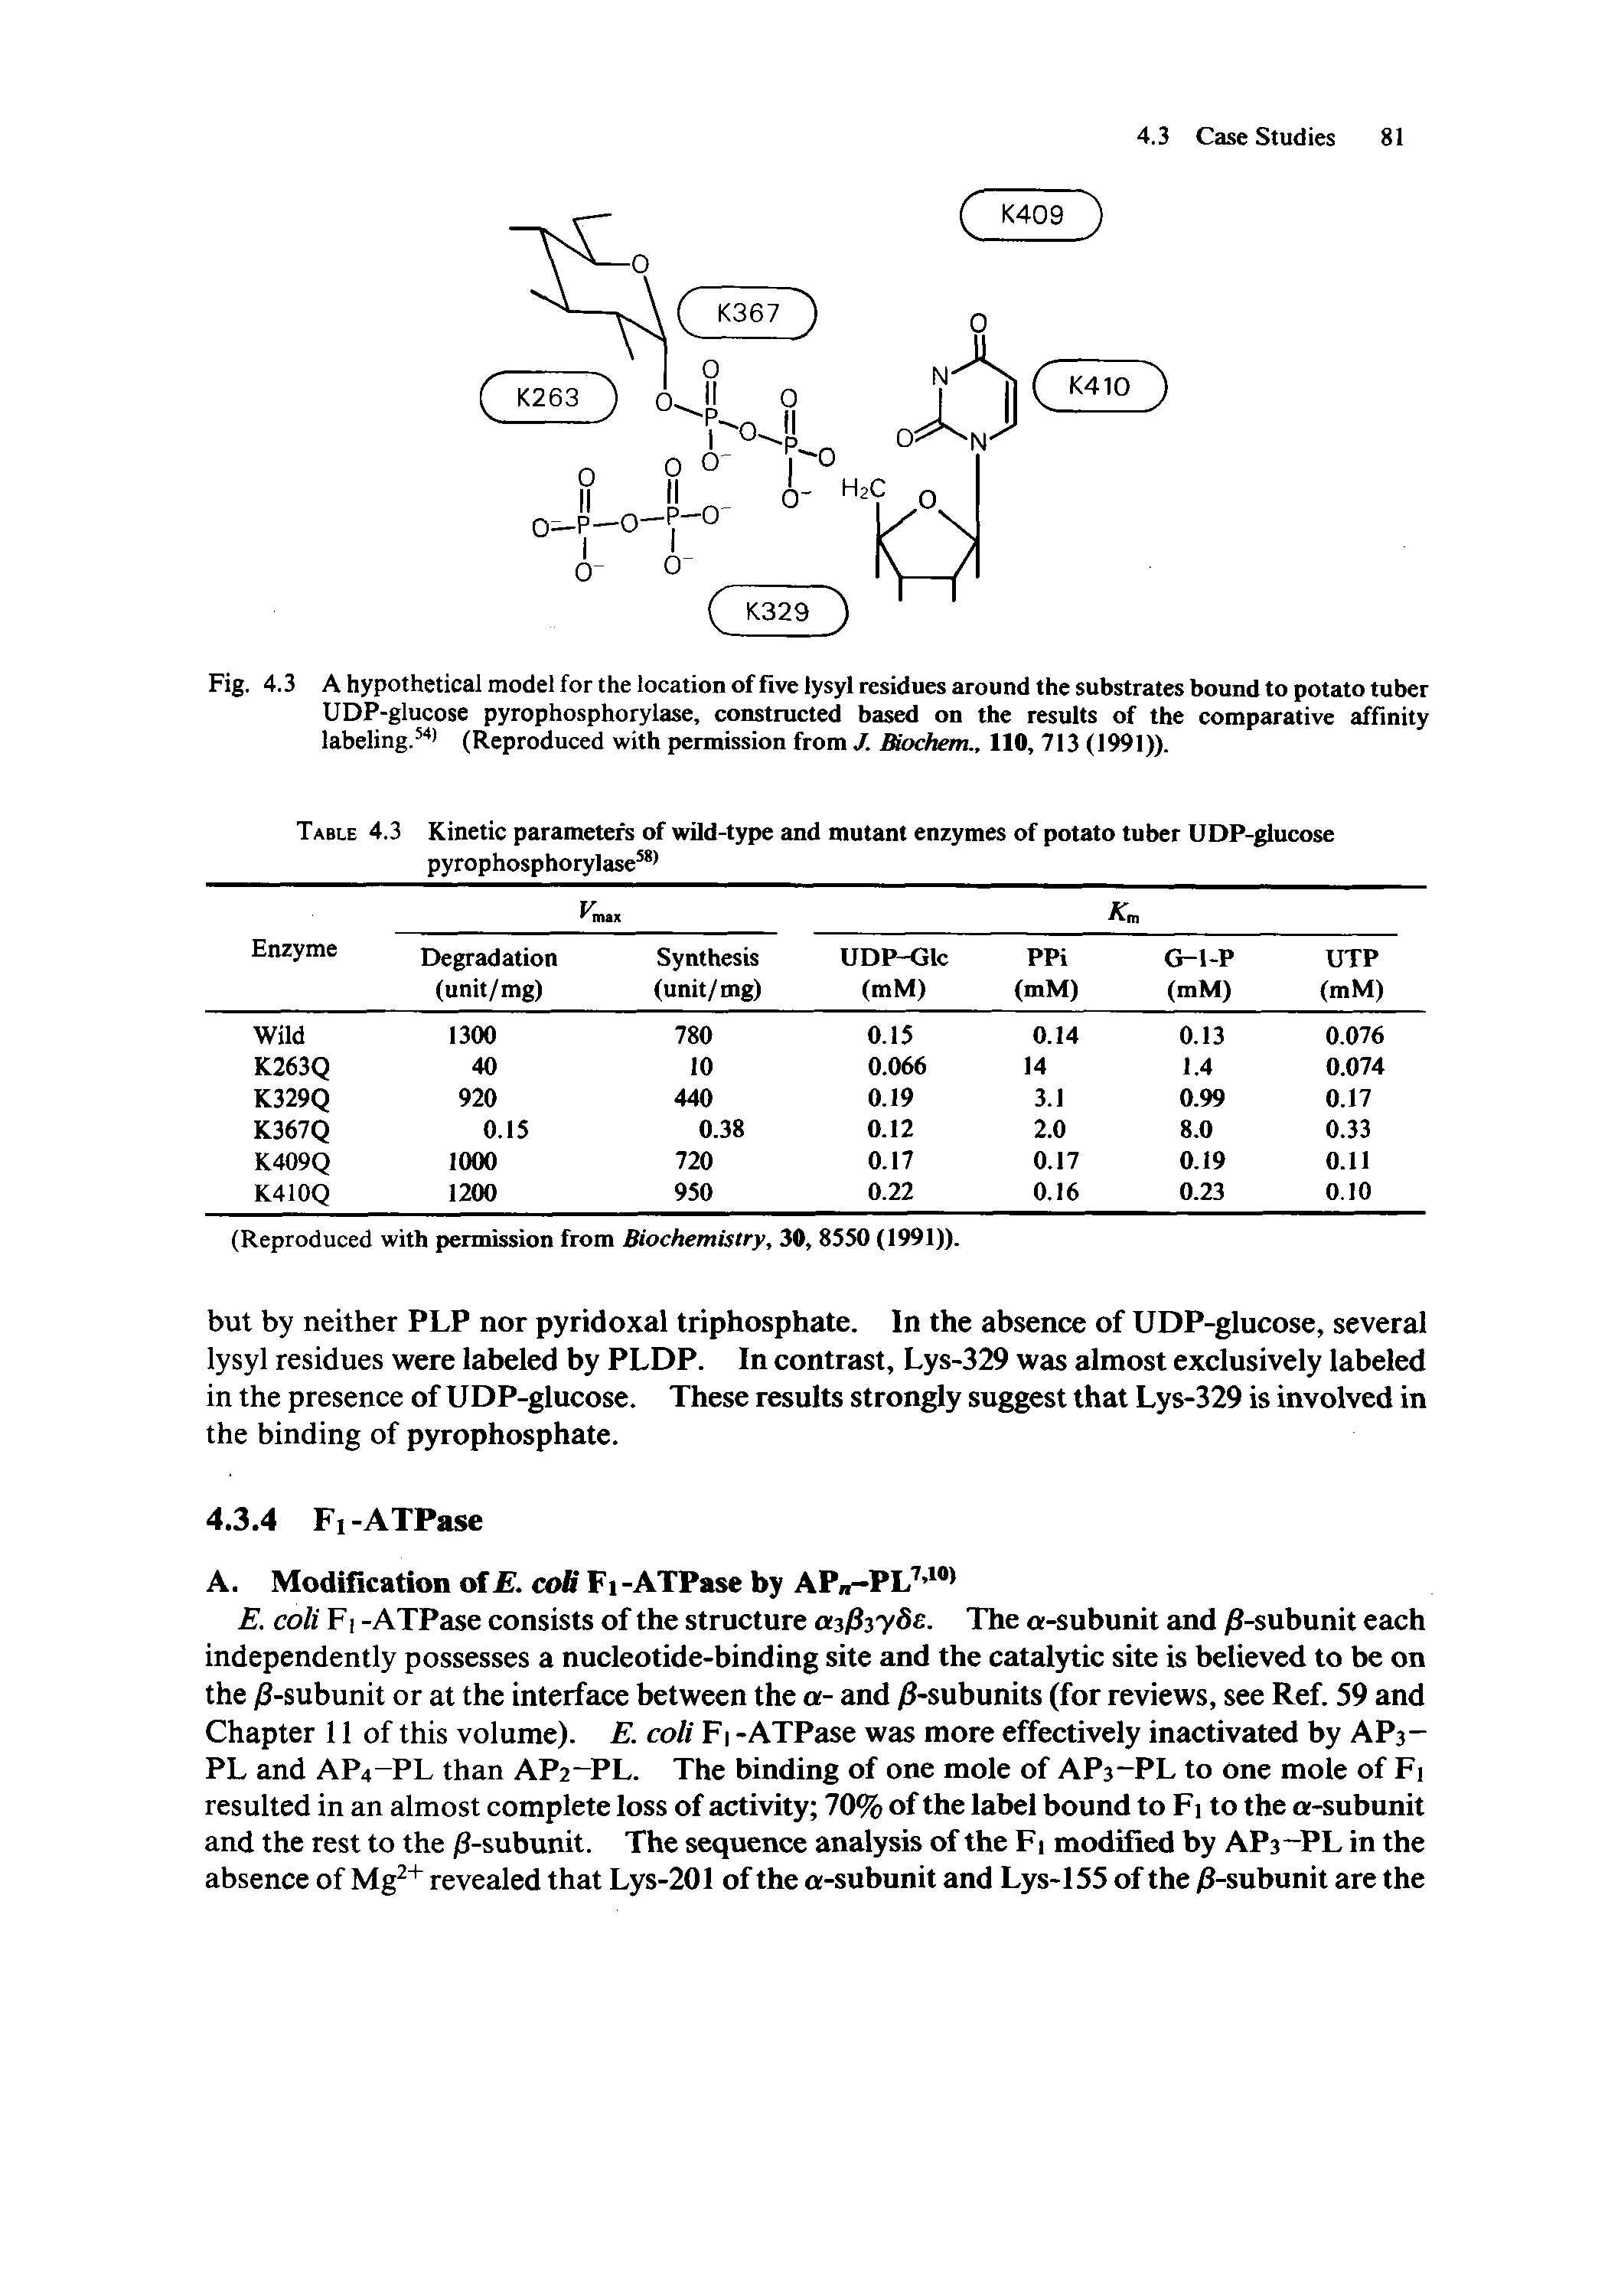 Fig. 4.3 A hypothetical model for the location of five lysyl residues around the substrates bound to potato tuber UDP-glucose pyrophosphorylase, constructed based on the results of the comparative affinity labeling.541 (Reproduced with permission from J. Biochem., 110, 713 (1991)).